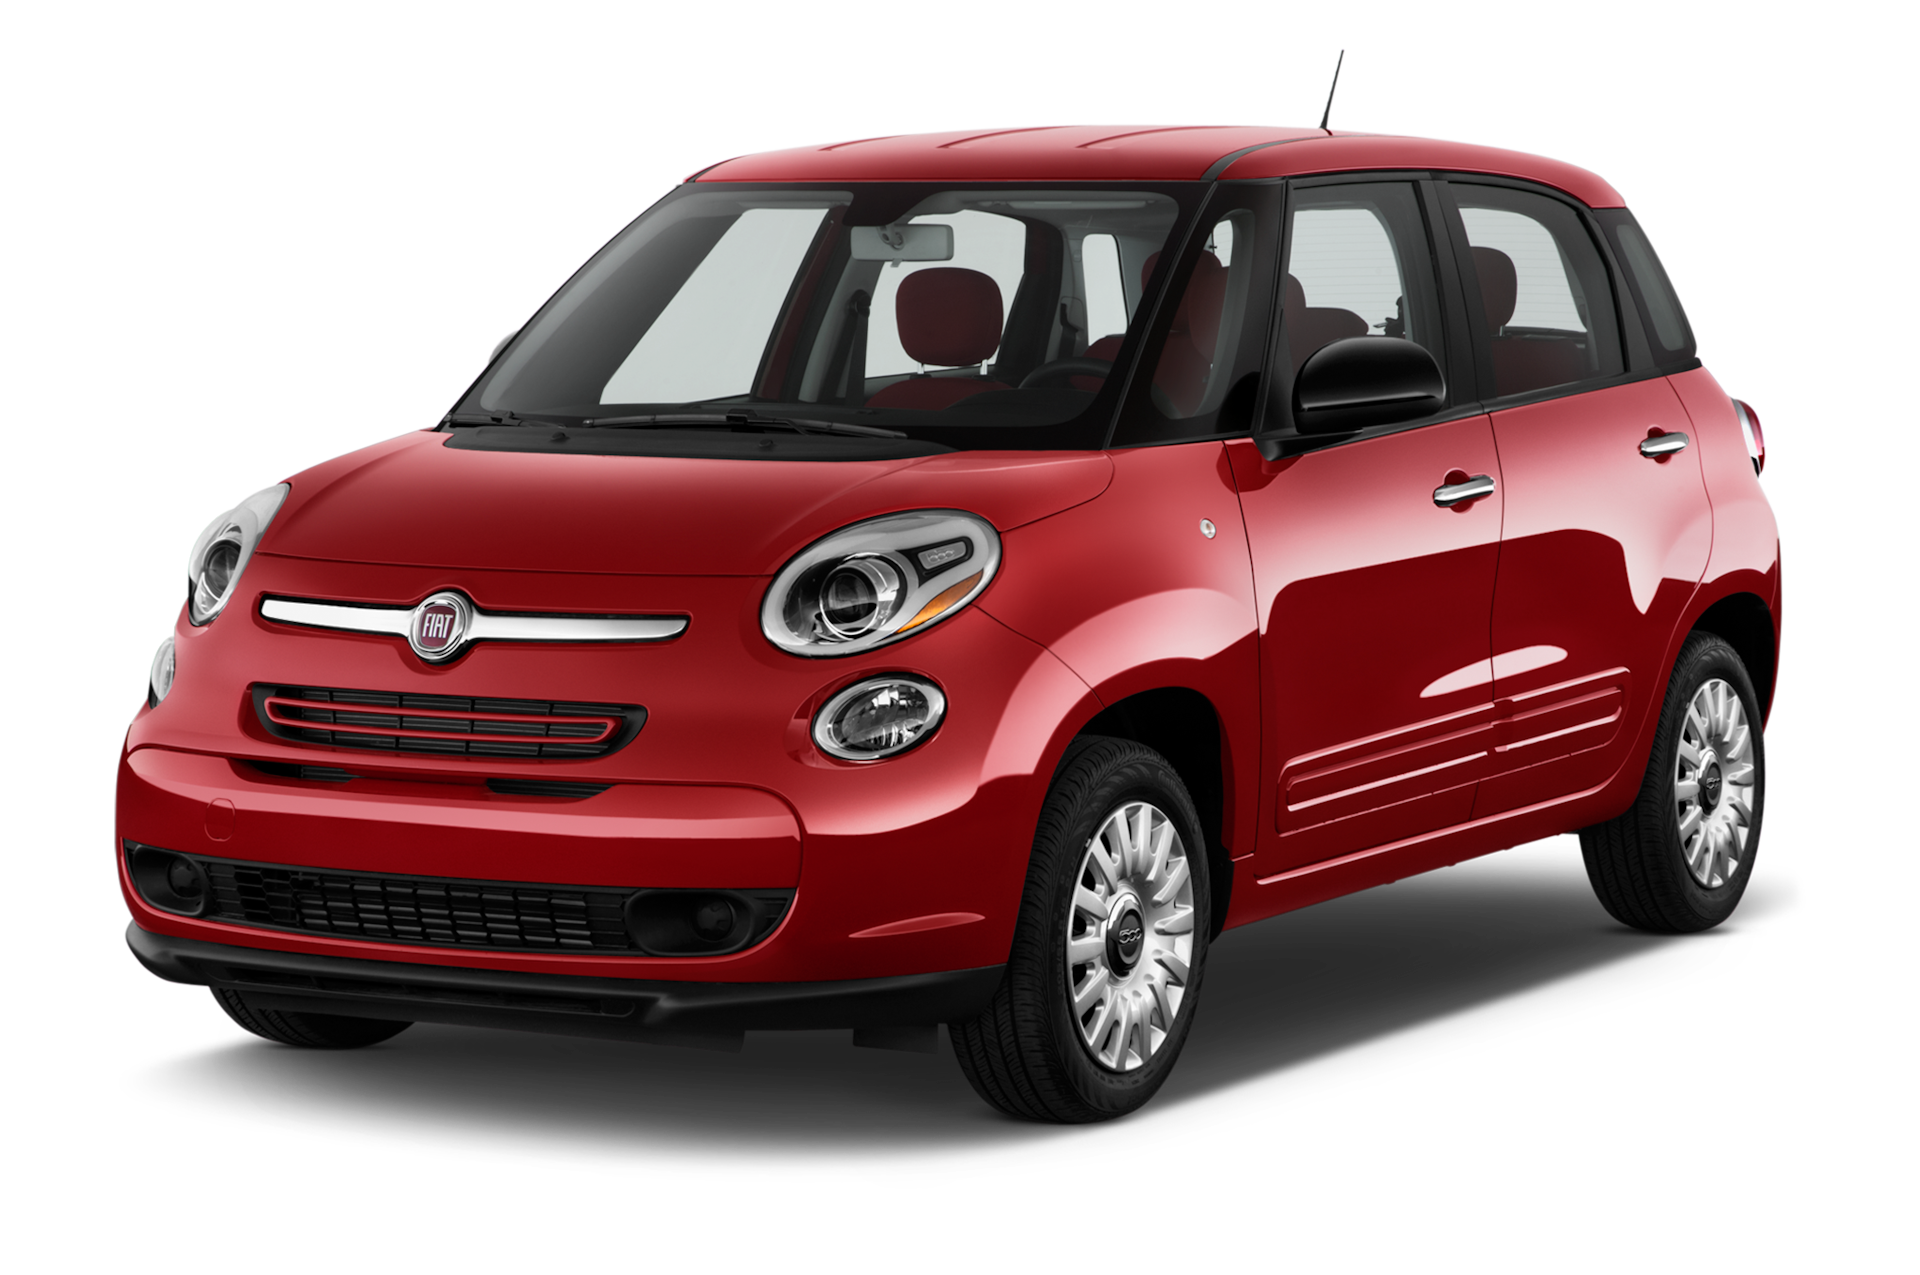 2014 FIAT 500L Prices, Reviews, and Photos - MotorTrend